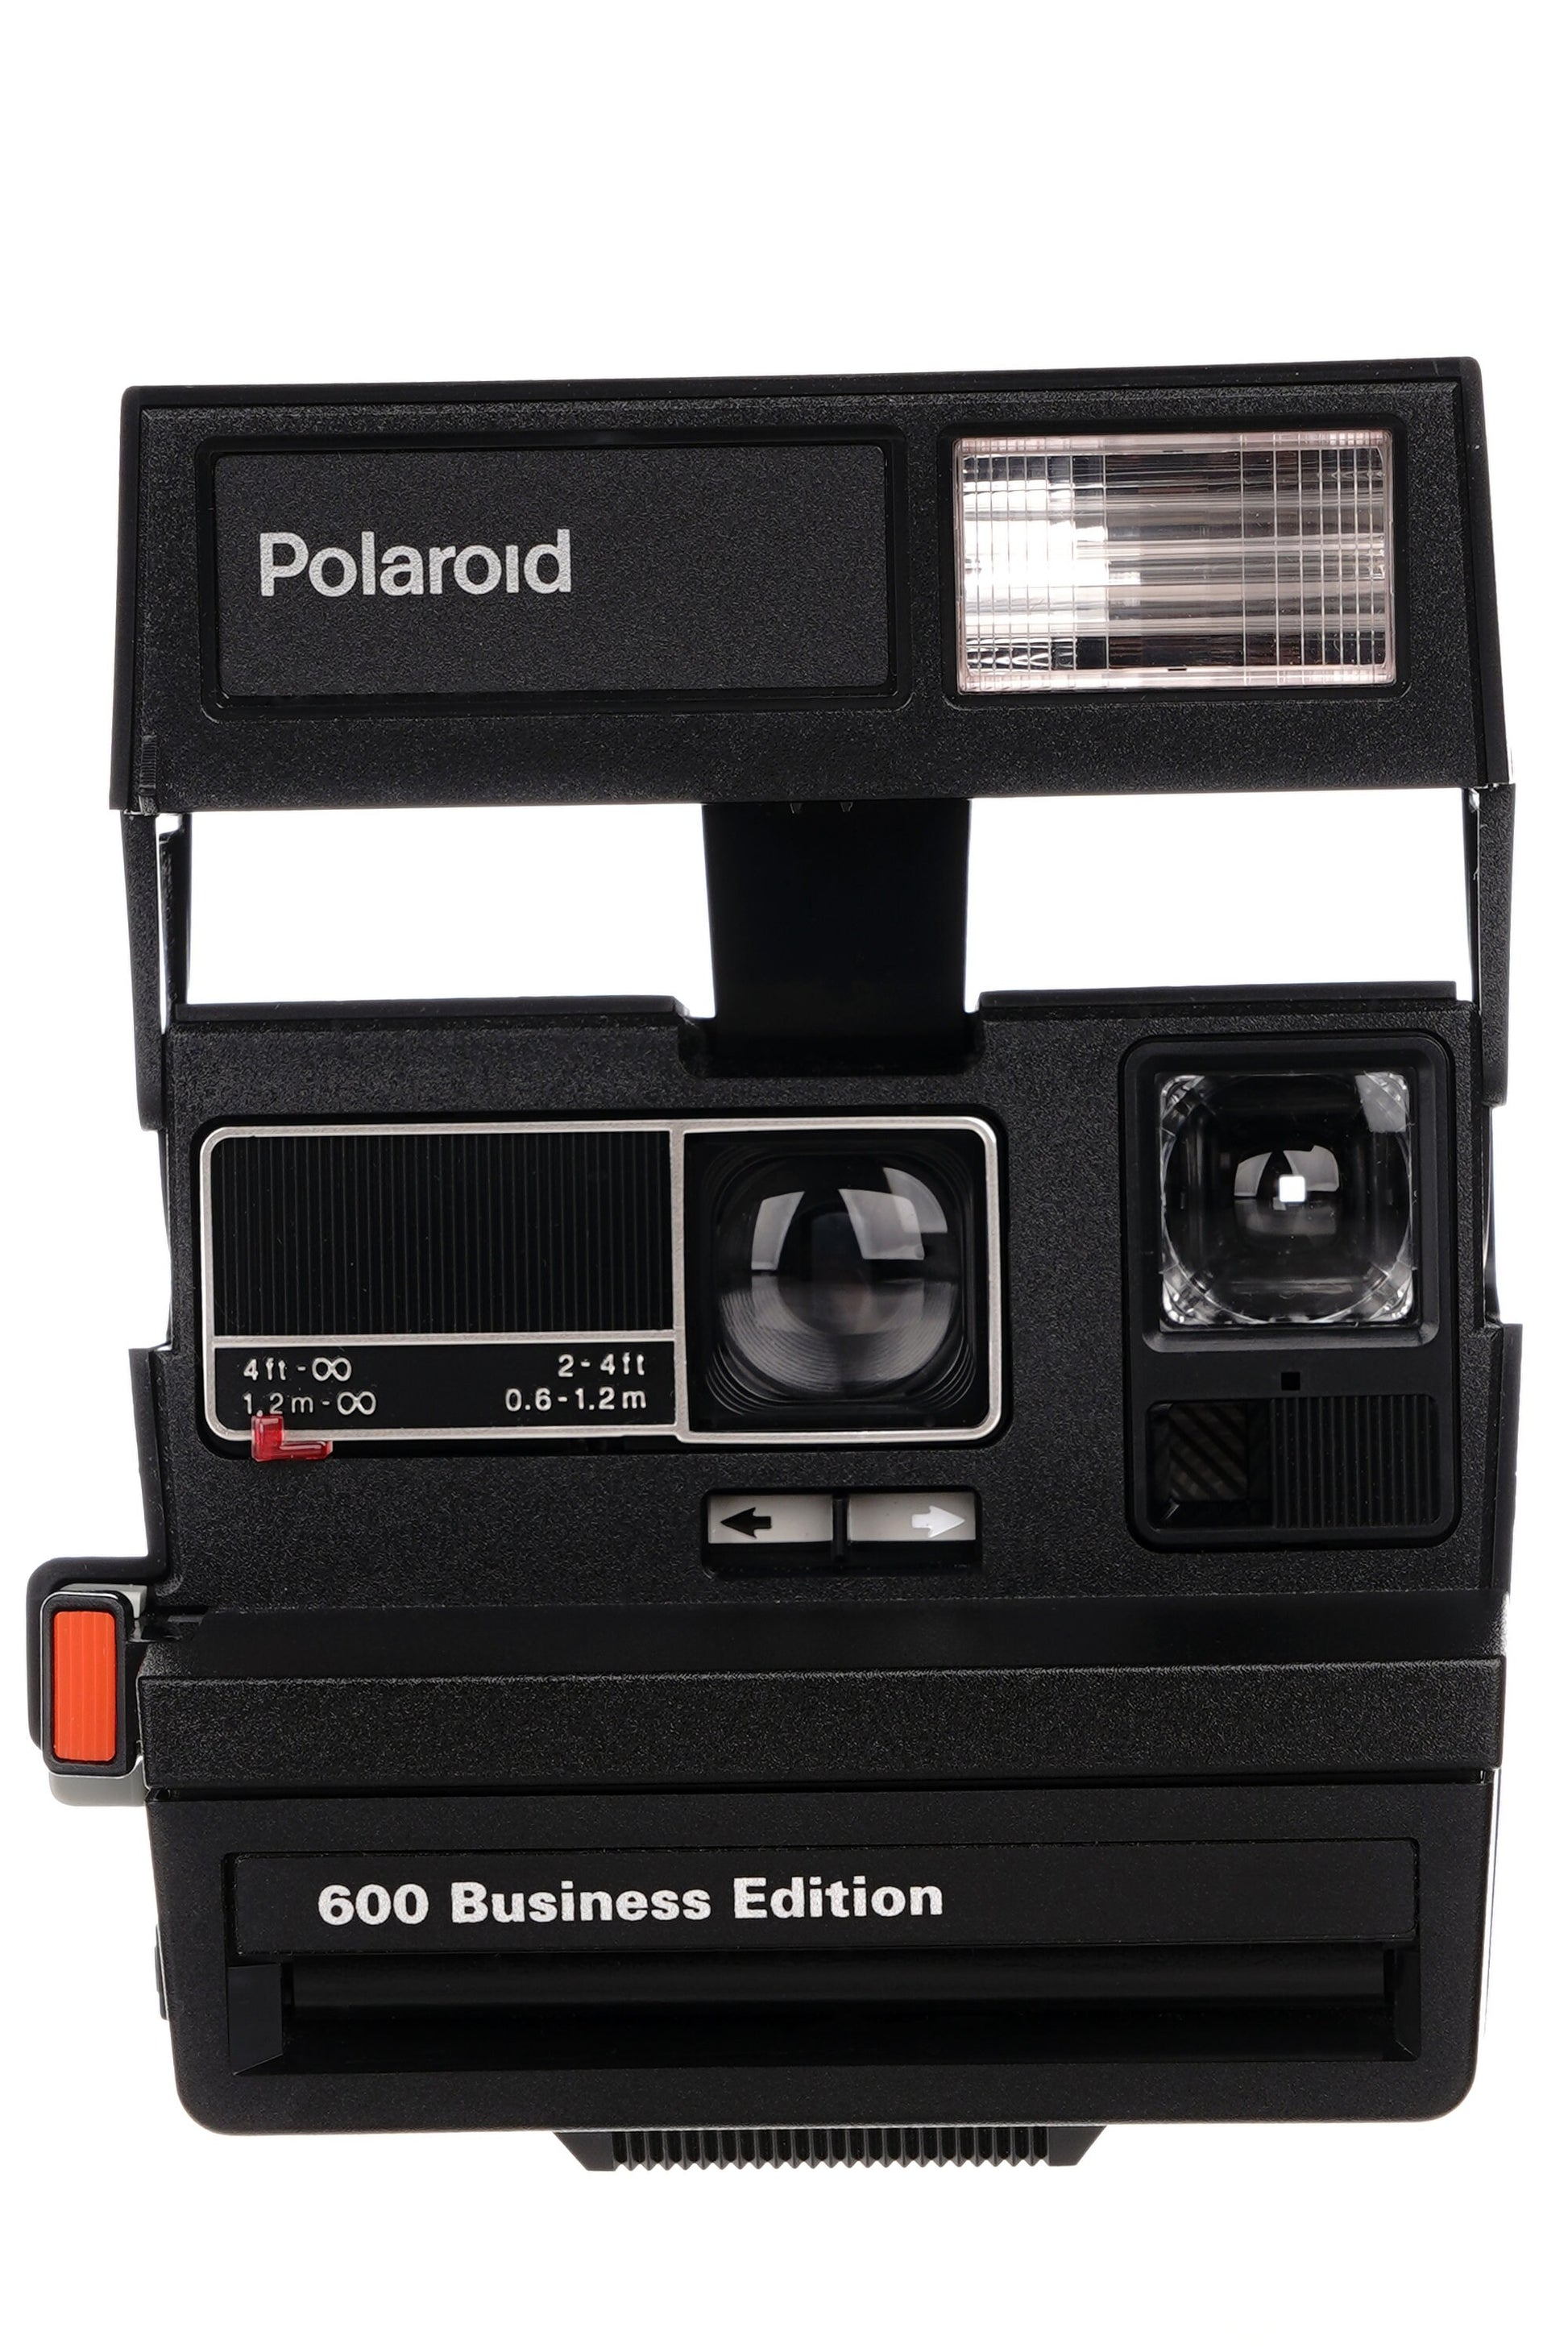 Polaroid 600 Business Edition Instant Camera Boxed Special Professional Edition - Vintage Polaroid Instant Cameras